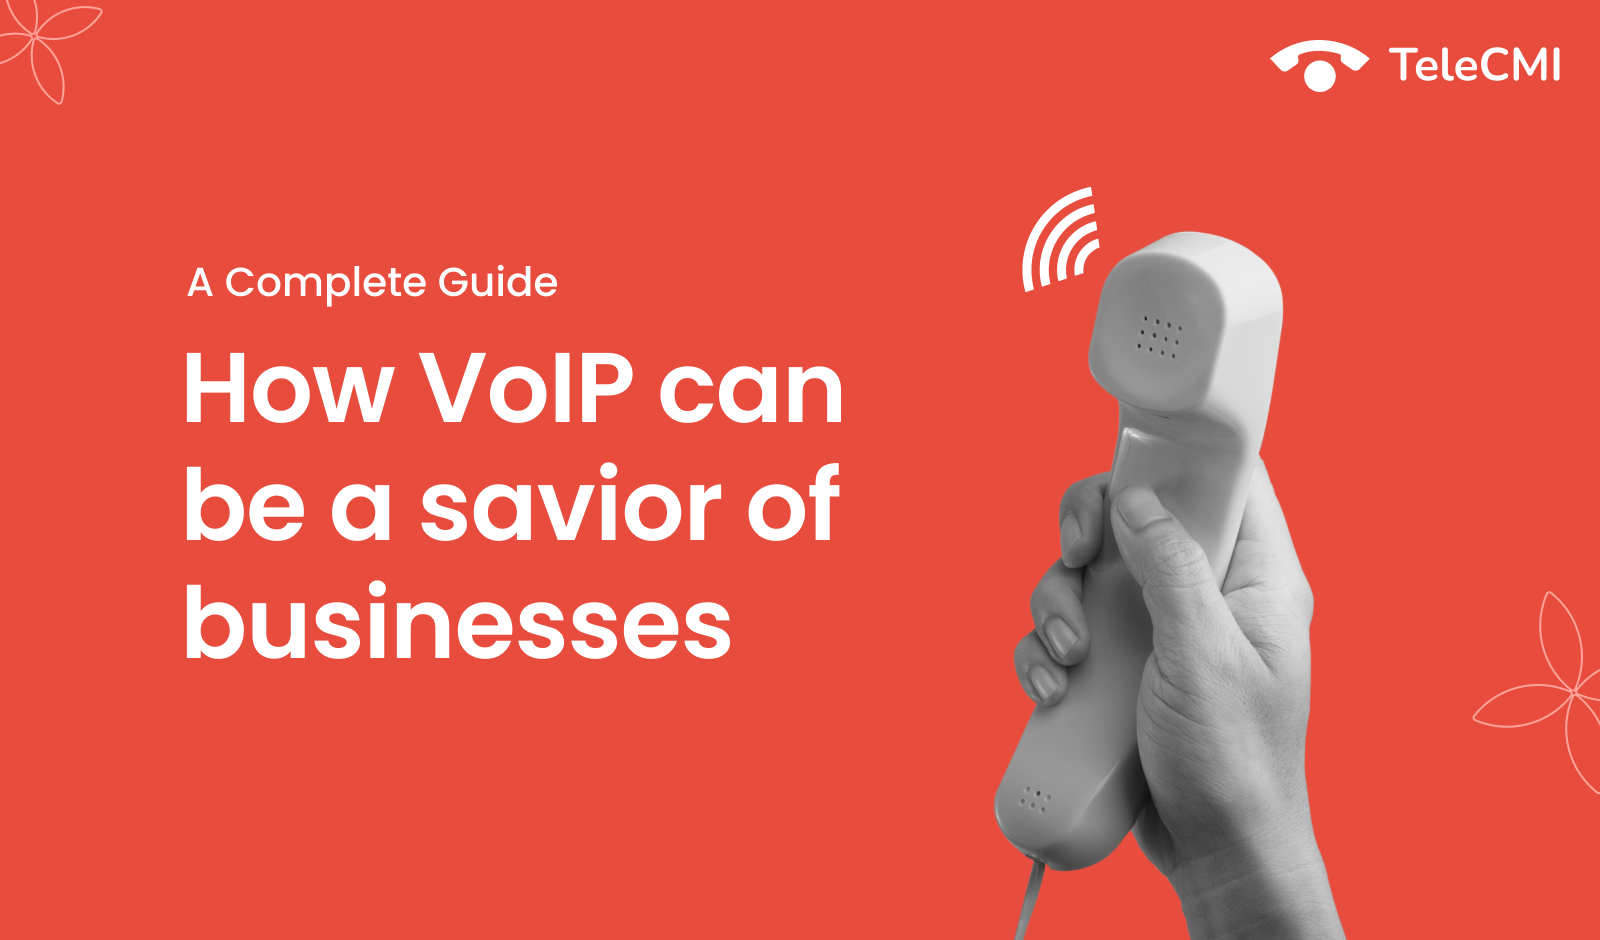 How Can VoIP Providers Be the Saviors of Your Business?